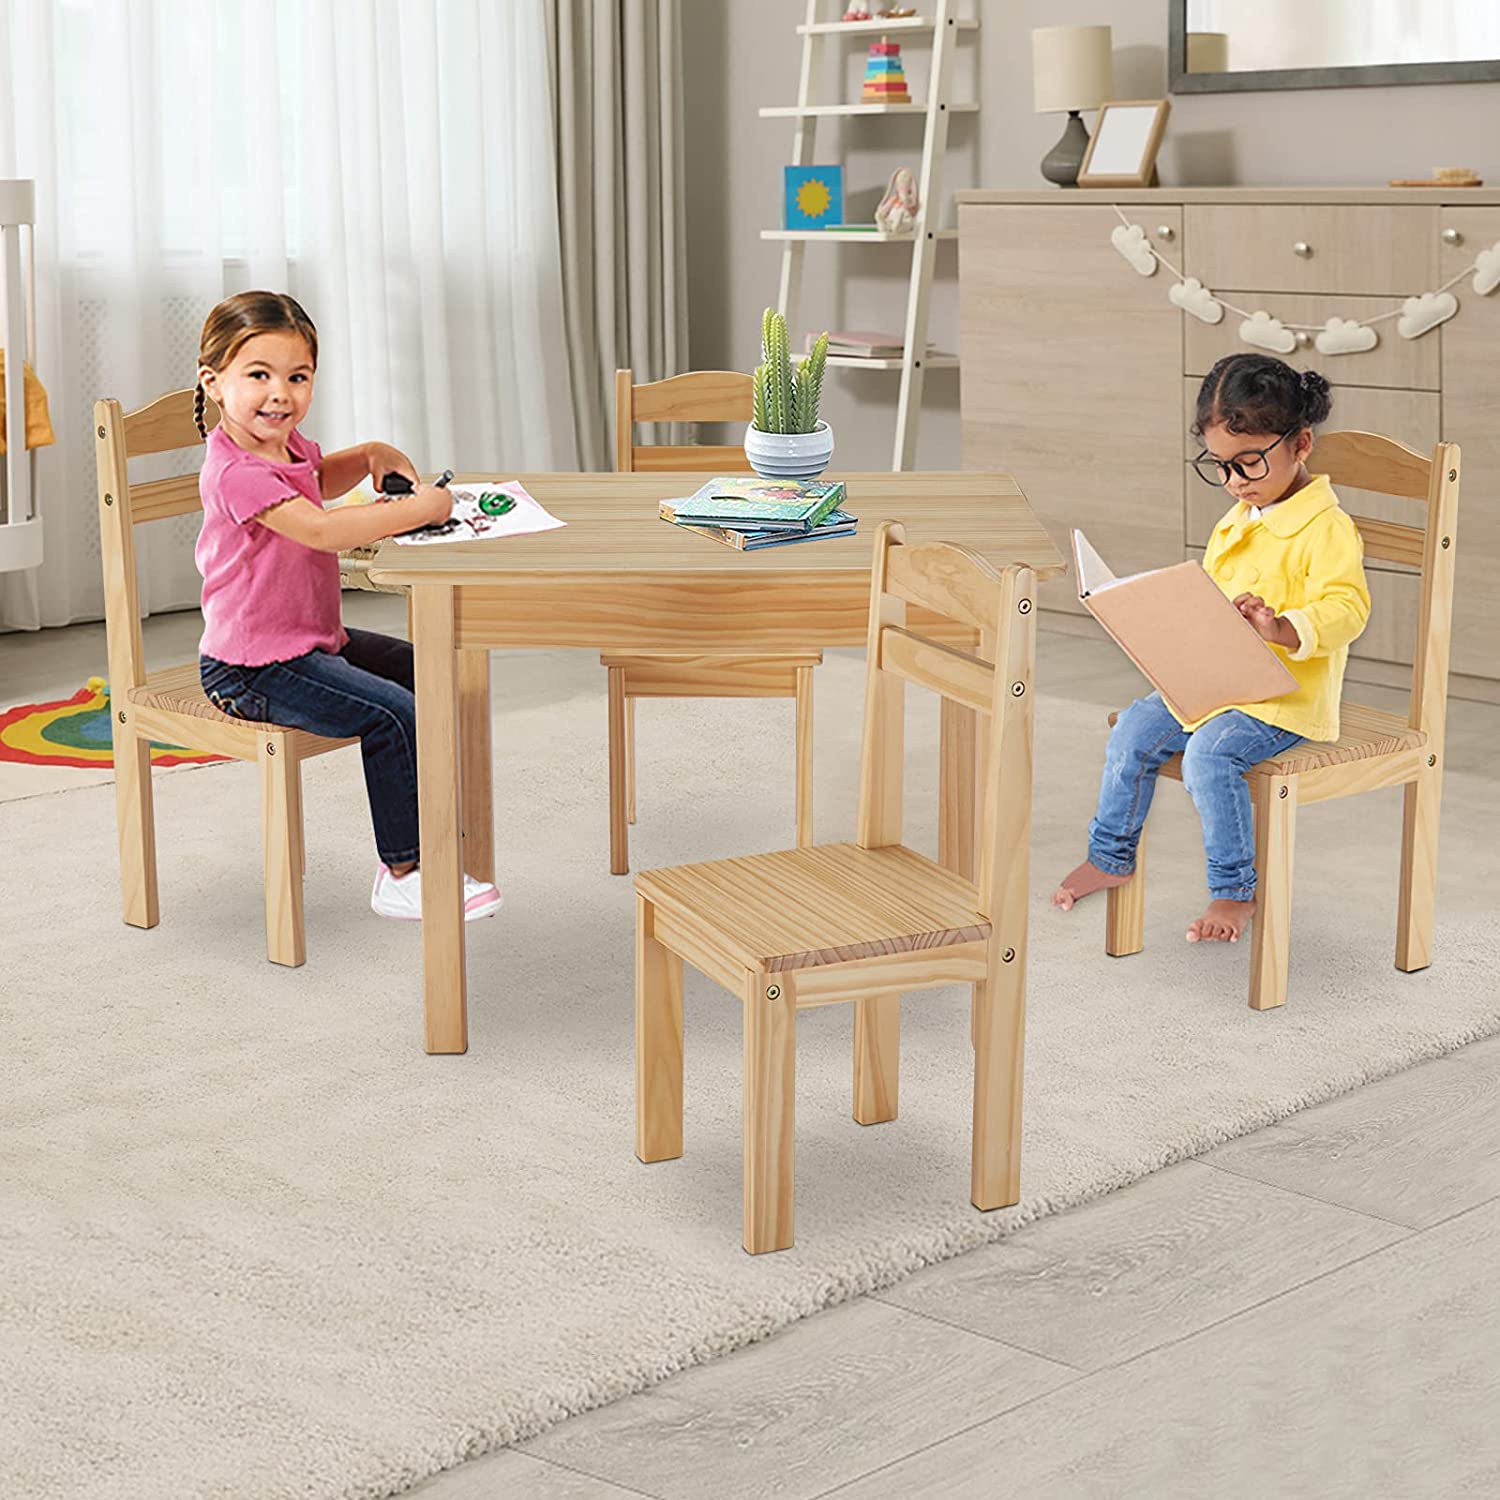 Kids Wooden Table and 4 Chairs Playroom Furniture Kindergarten Table   (8).jpg